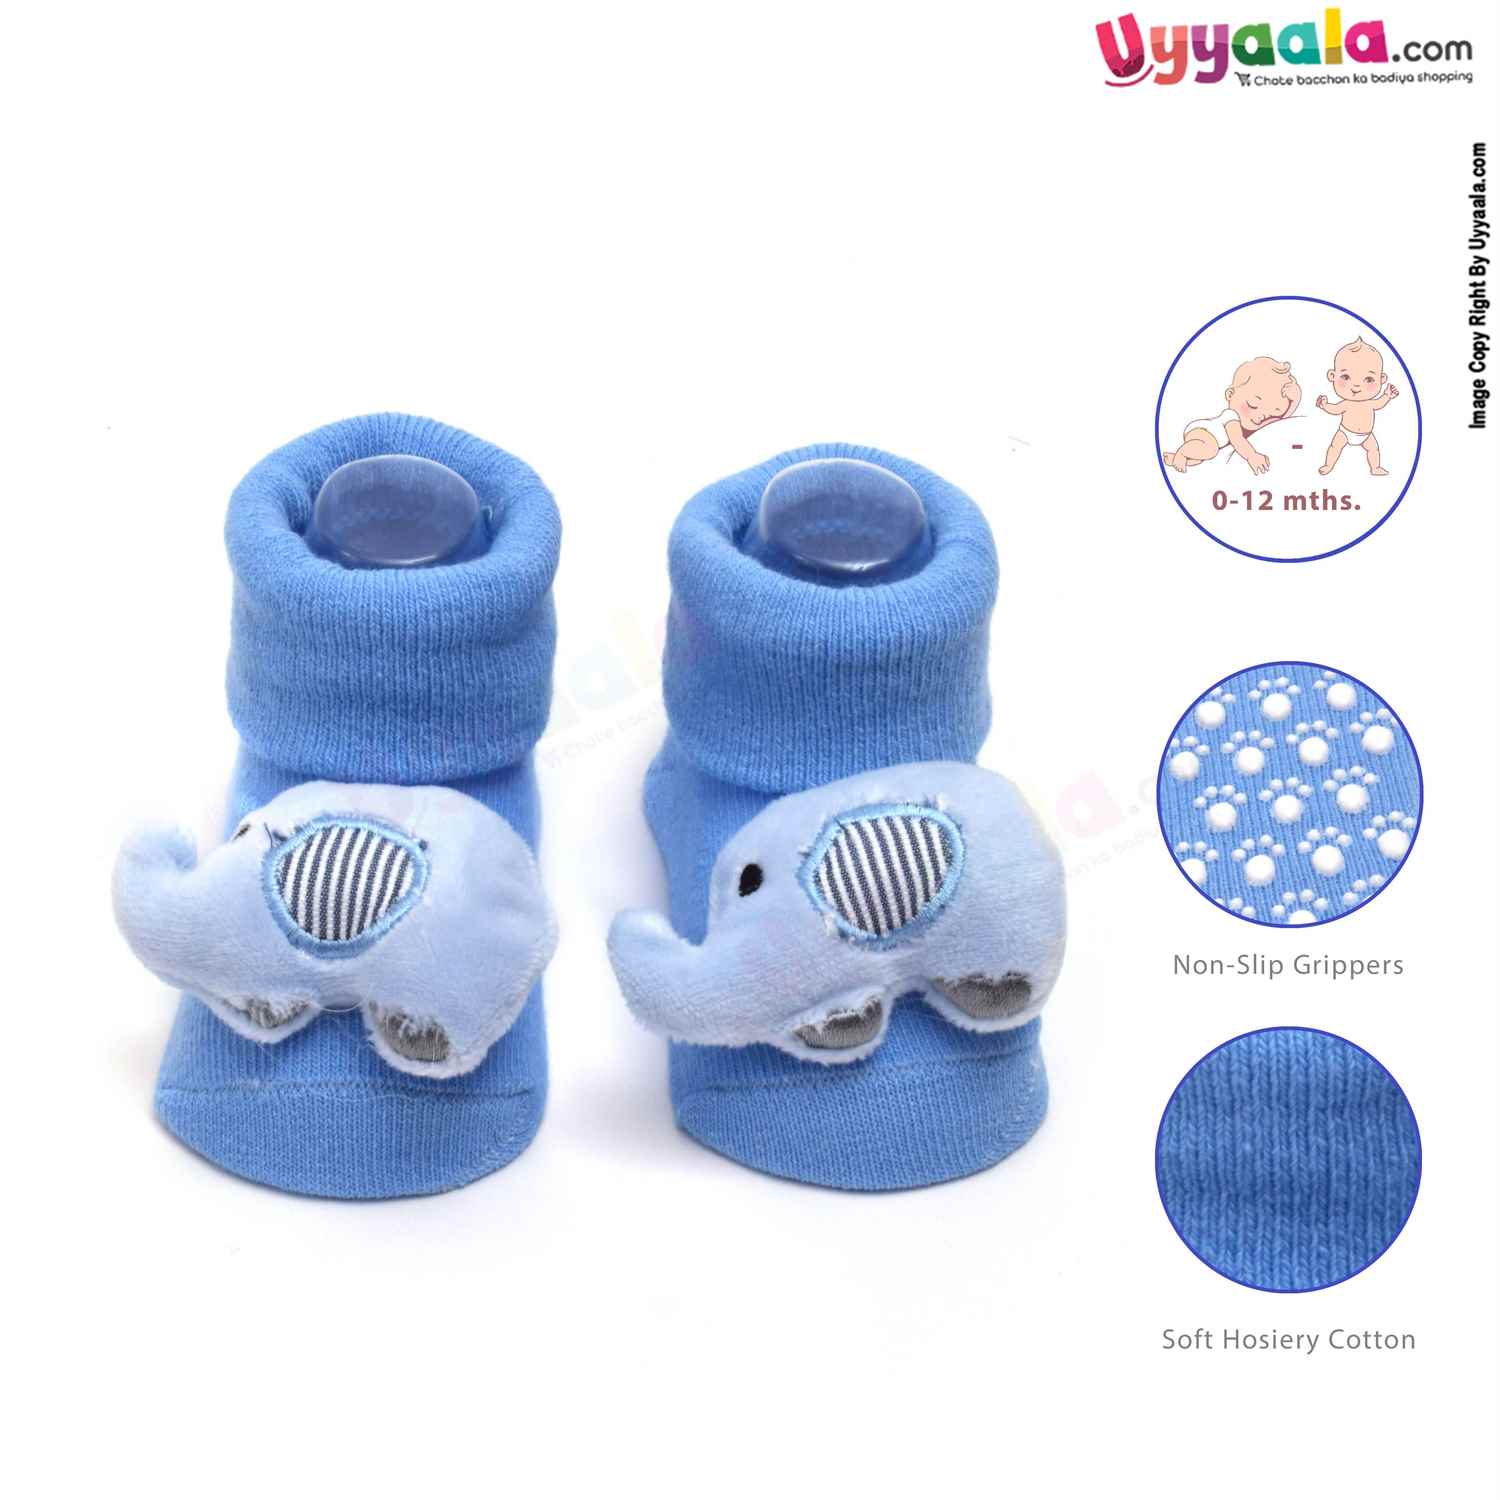 Hosiery Cotton Baby Socks with Elephant Character ,0 to 12m Age- Blue